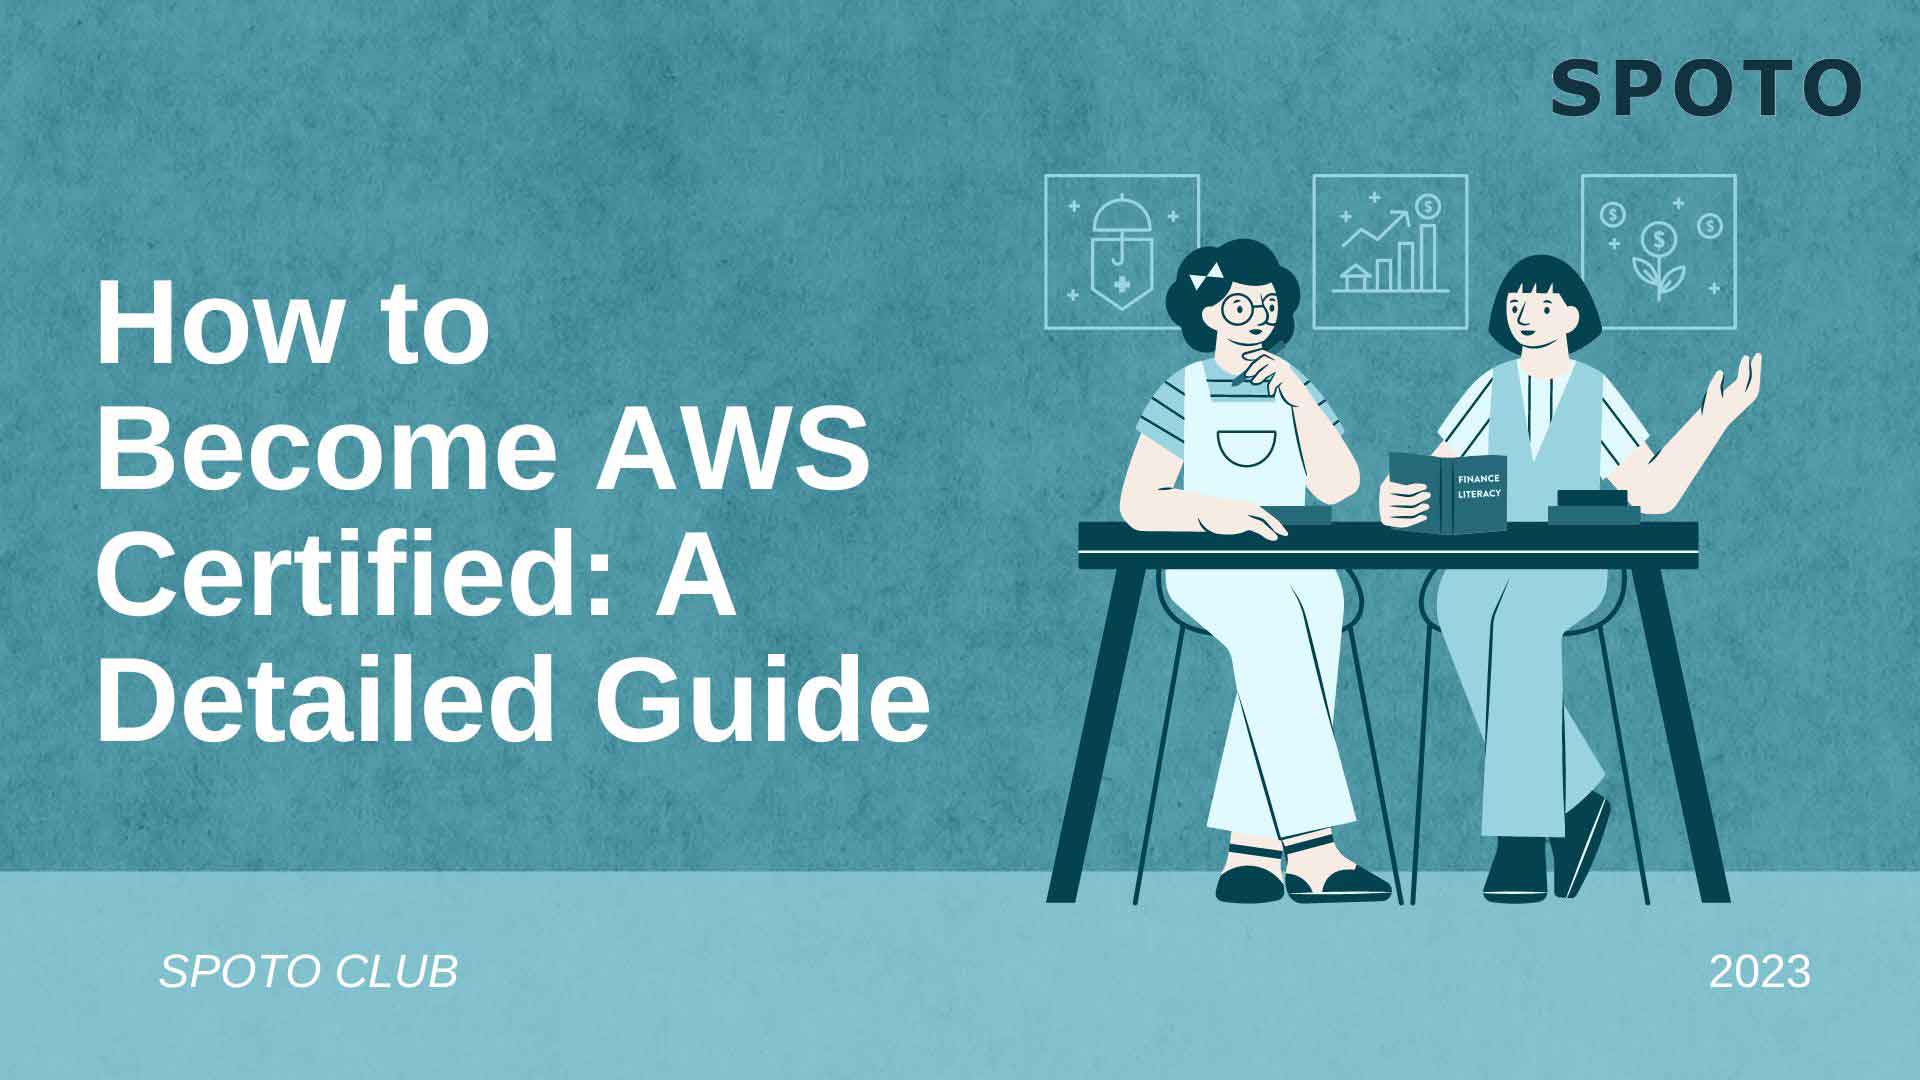 AWS Certified Guide